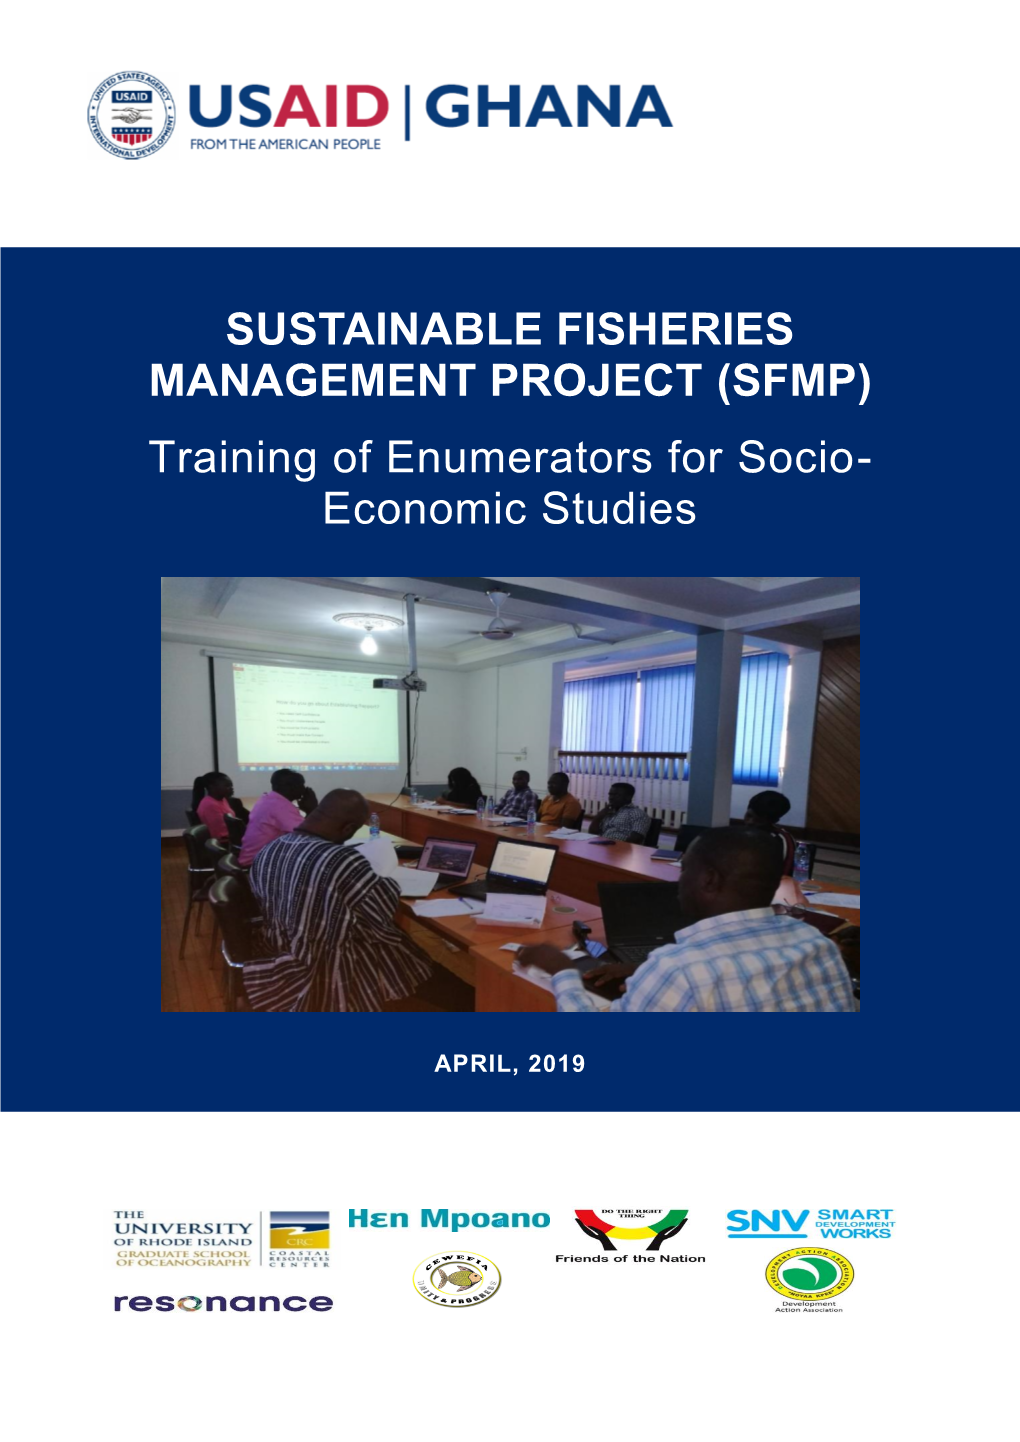 Training of Enumerators for Socio-Economic Studies. the USAID/Ghana Sustainable Fisheries Management Project (SFMP)